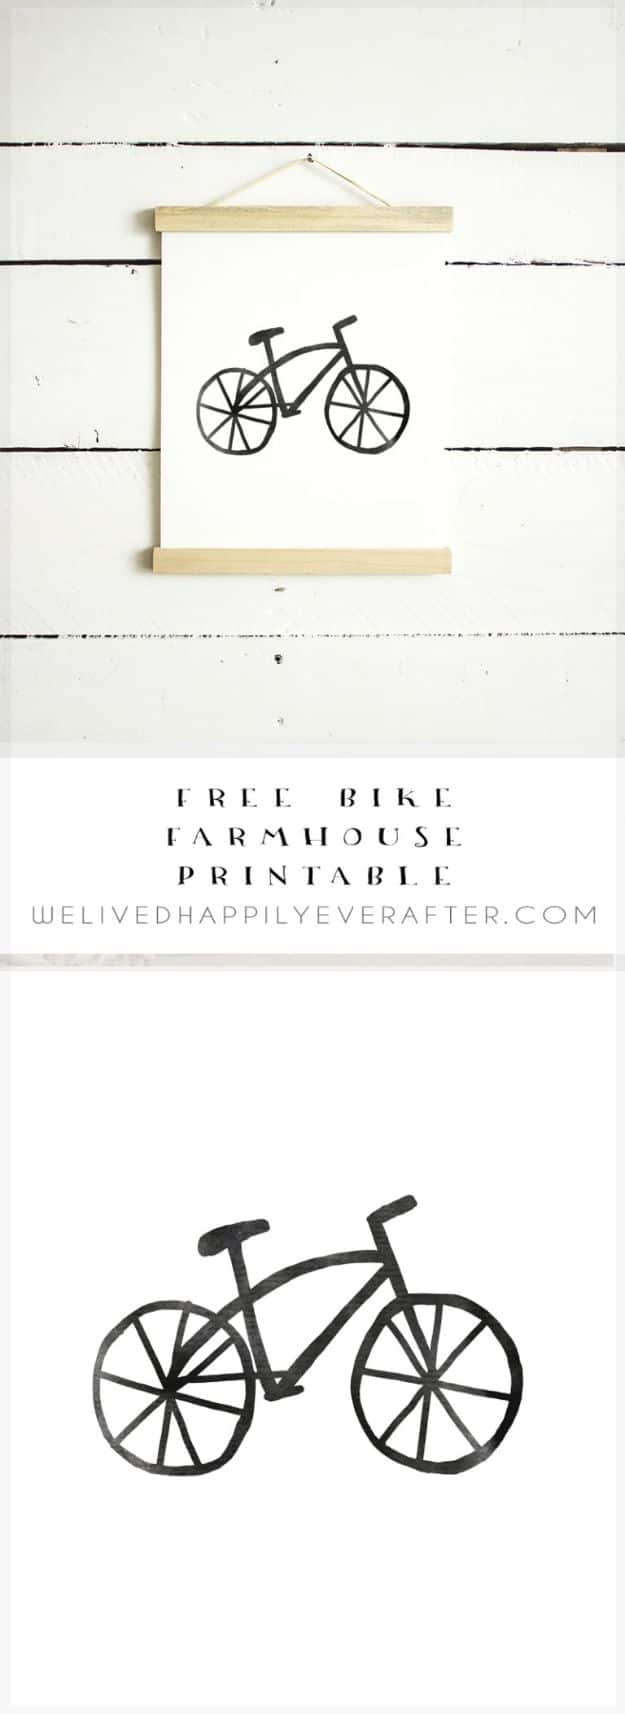 Free Printables For Your Walls - Free Bike Farmhouse Printable - Easy Canvas Ideas With Free Downloadable Artwork and Quote Sayings - Best Free Prints for Wall Art and Picture to Print for Home and Bedroom Decor - Signs for the Home, Organization, Office - Quotes for Bedroom and Kitchens, Vintage Bathroom Pictures - Downloadable Printable for Kids - DIY and Crafts by DIY JOY #wallart #freeprintables #diyideas #diyart #walldecor #diyhomedecor #freeprintables